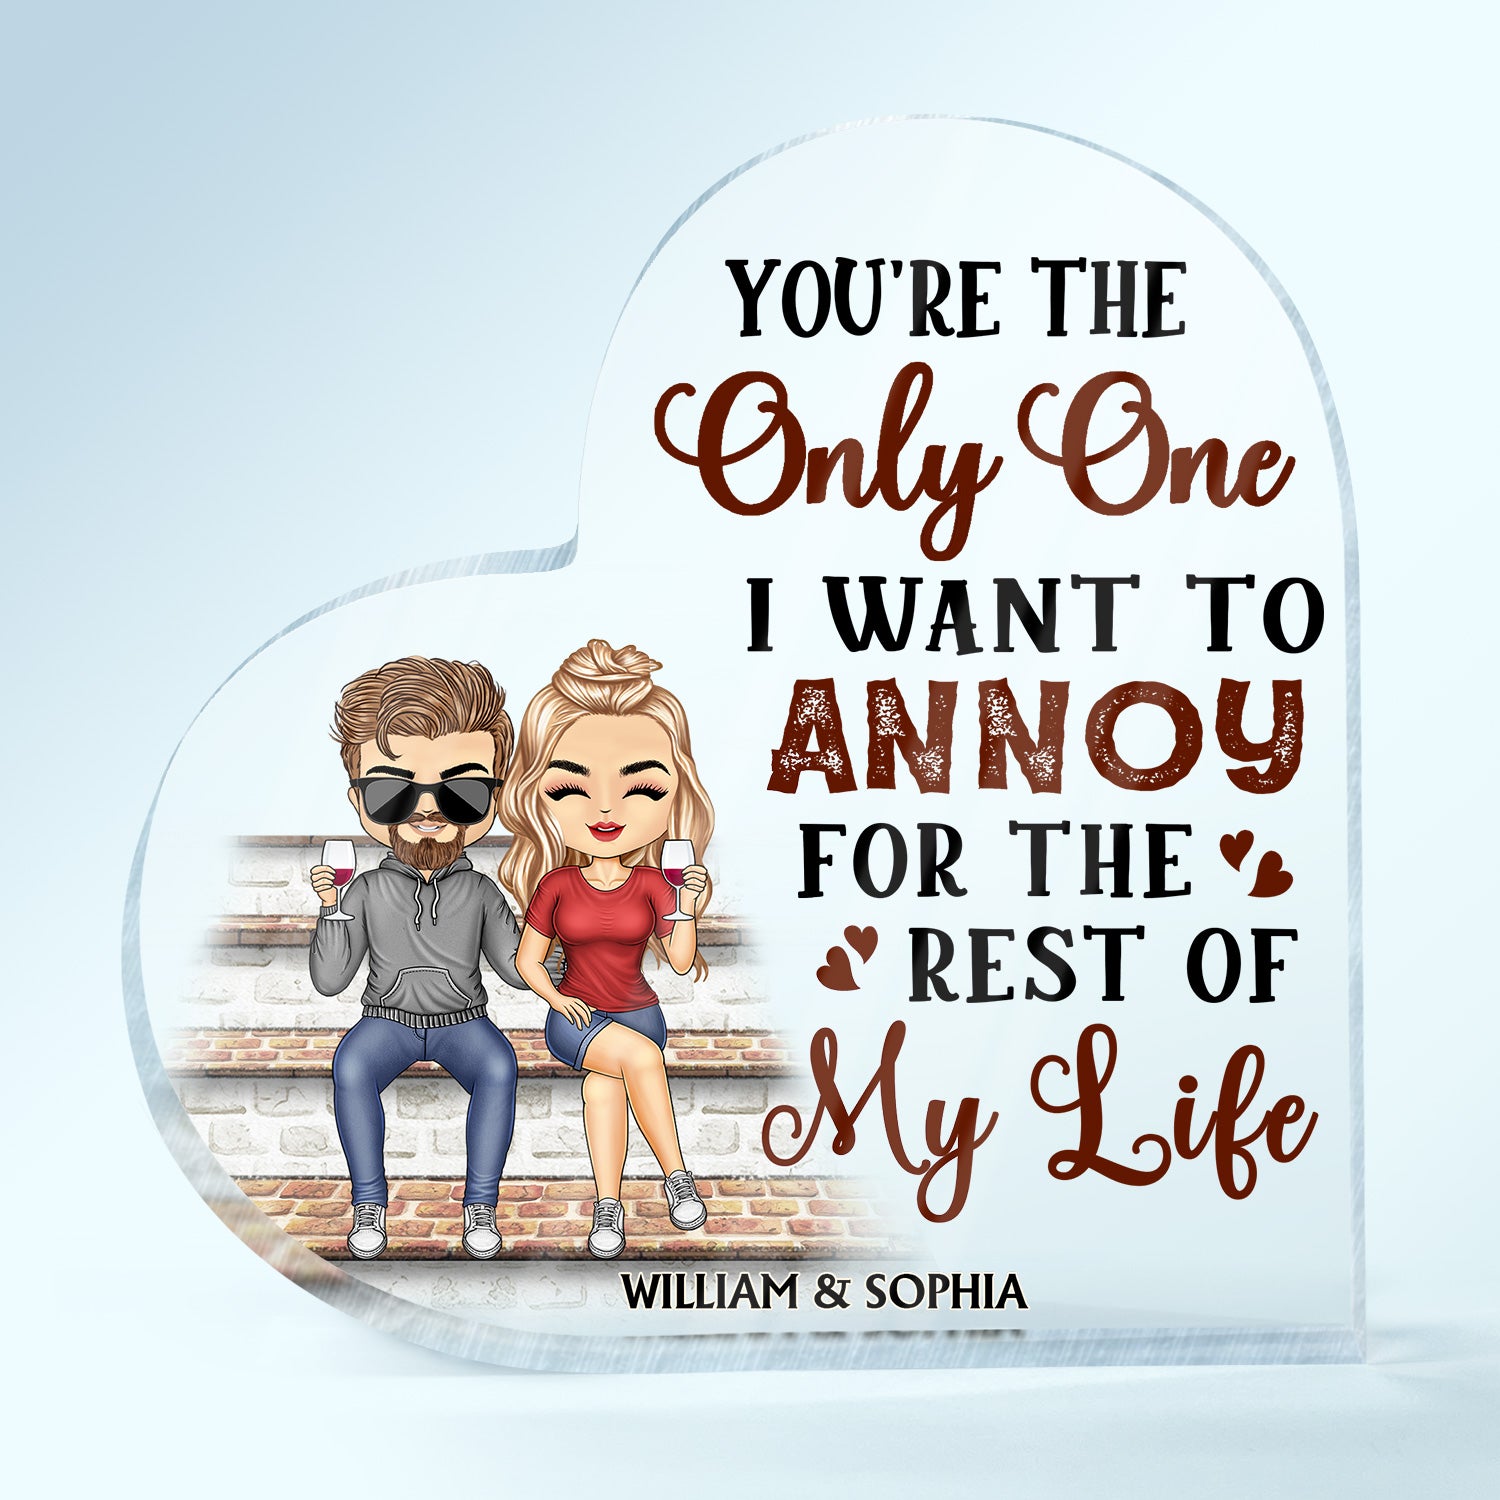 You're The Only One I Want To Annoy For The Rest Of My Life Couples - Home Decor, Anniversary, Birthday Gift For Spouse, Husband, Wife, Boyfriend, Girlfriend - Personalized Custom Heart Shaped Acrylic Plaque